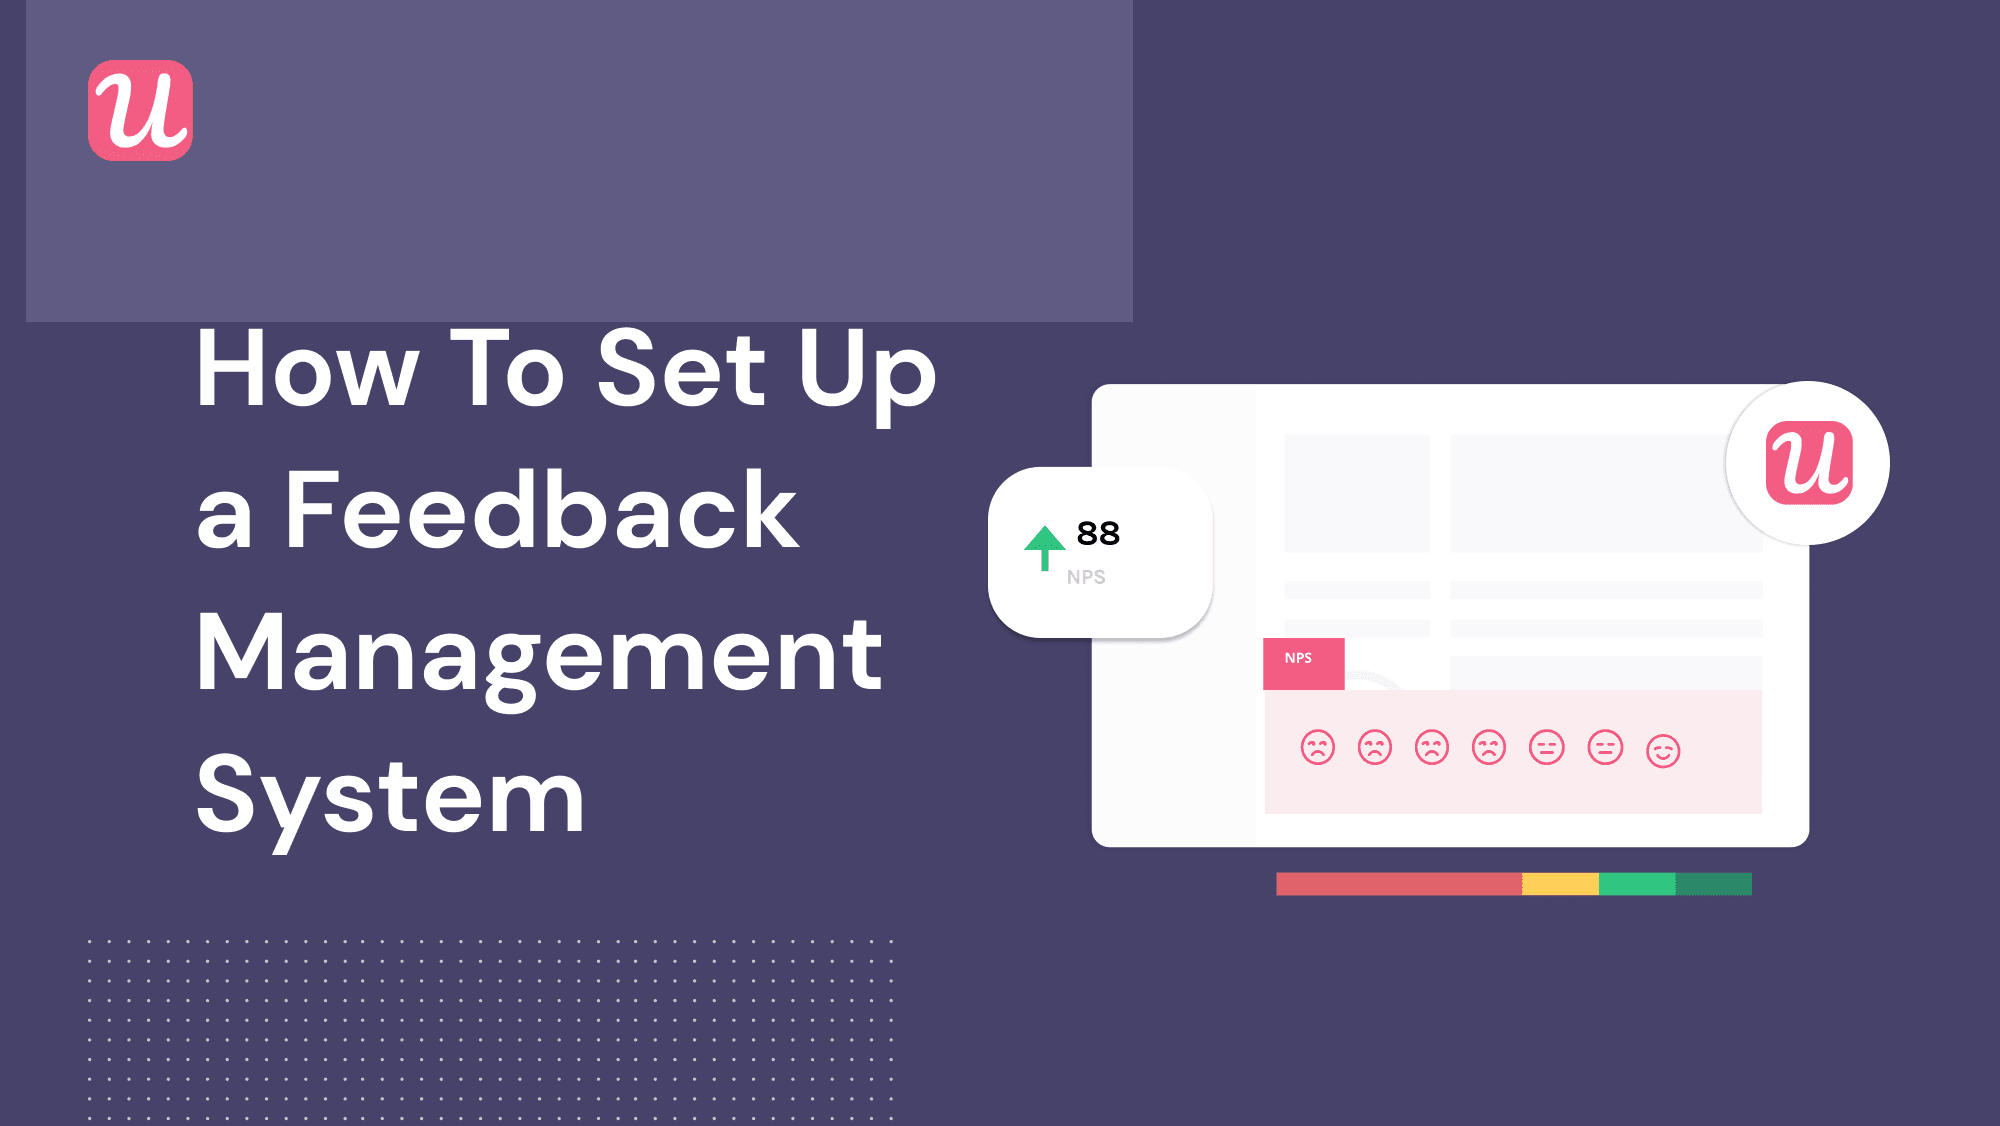 How To Set Up a Feedback Management System